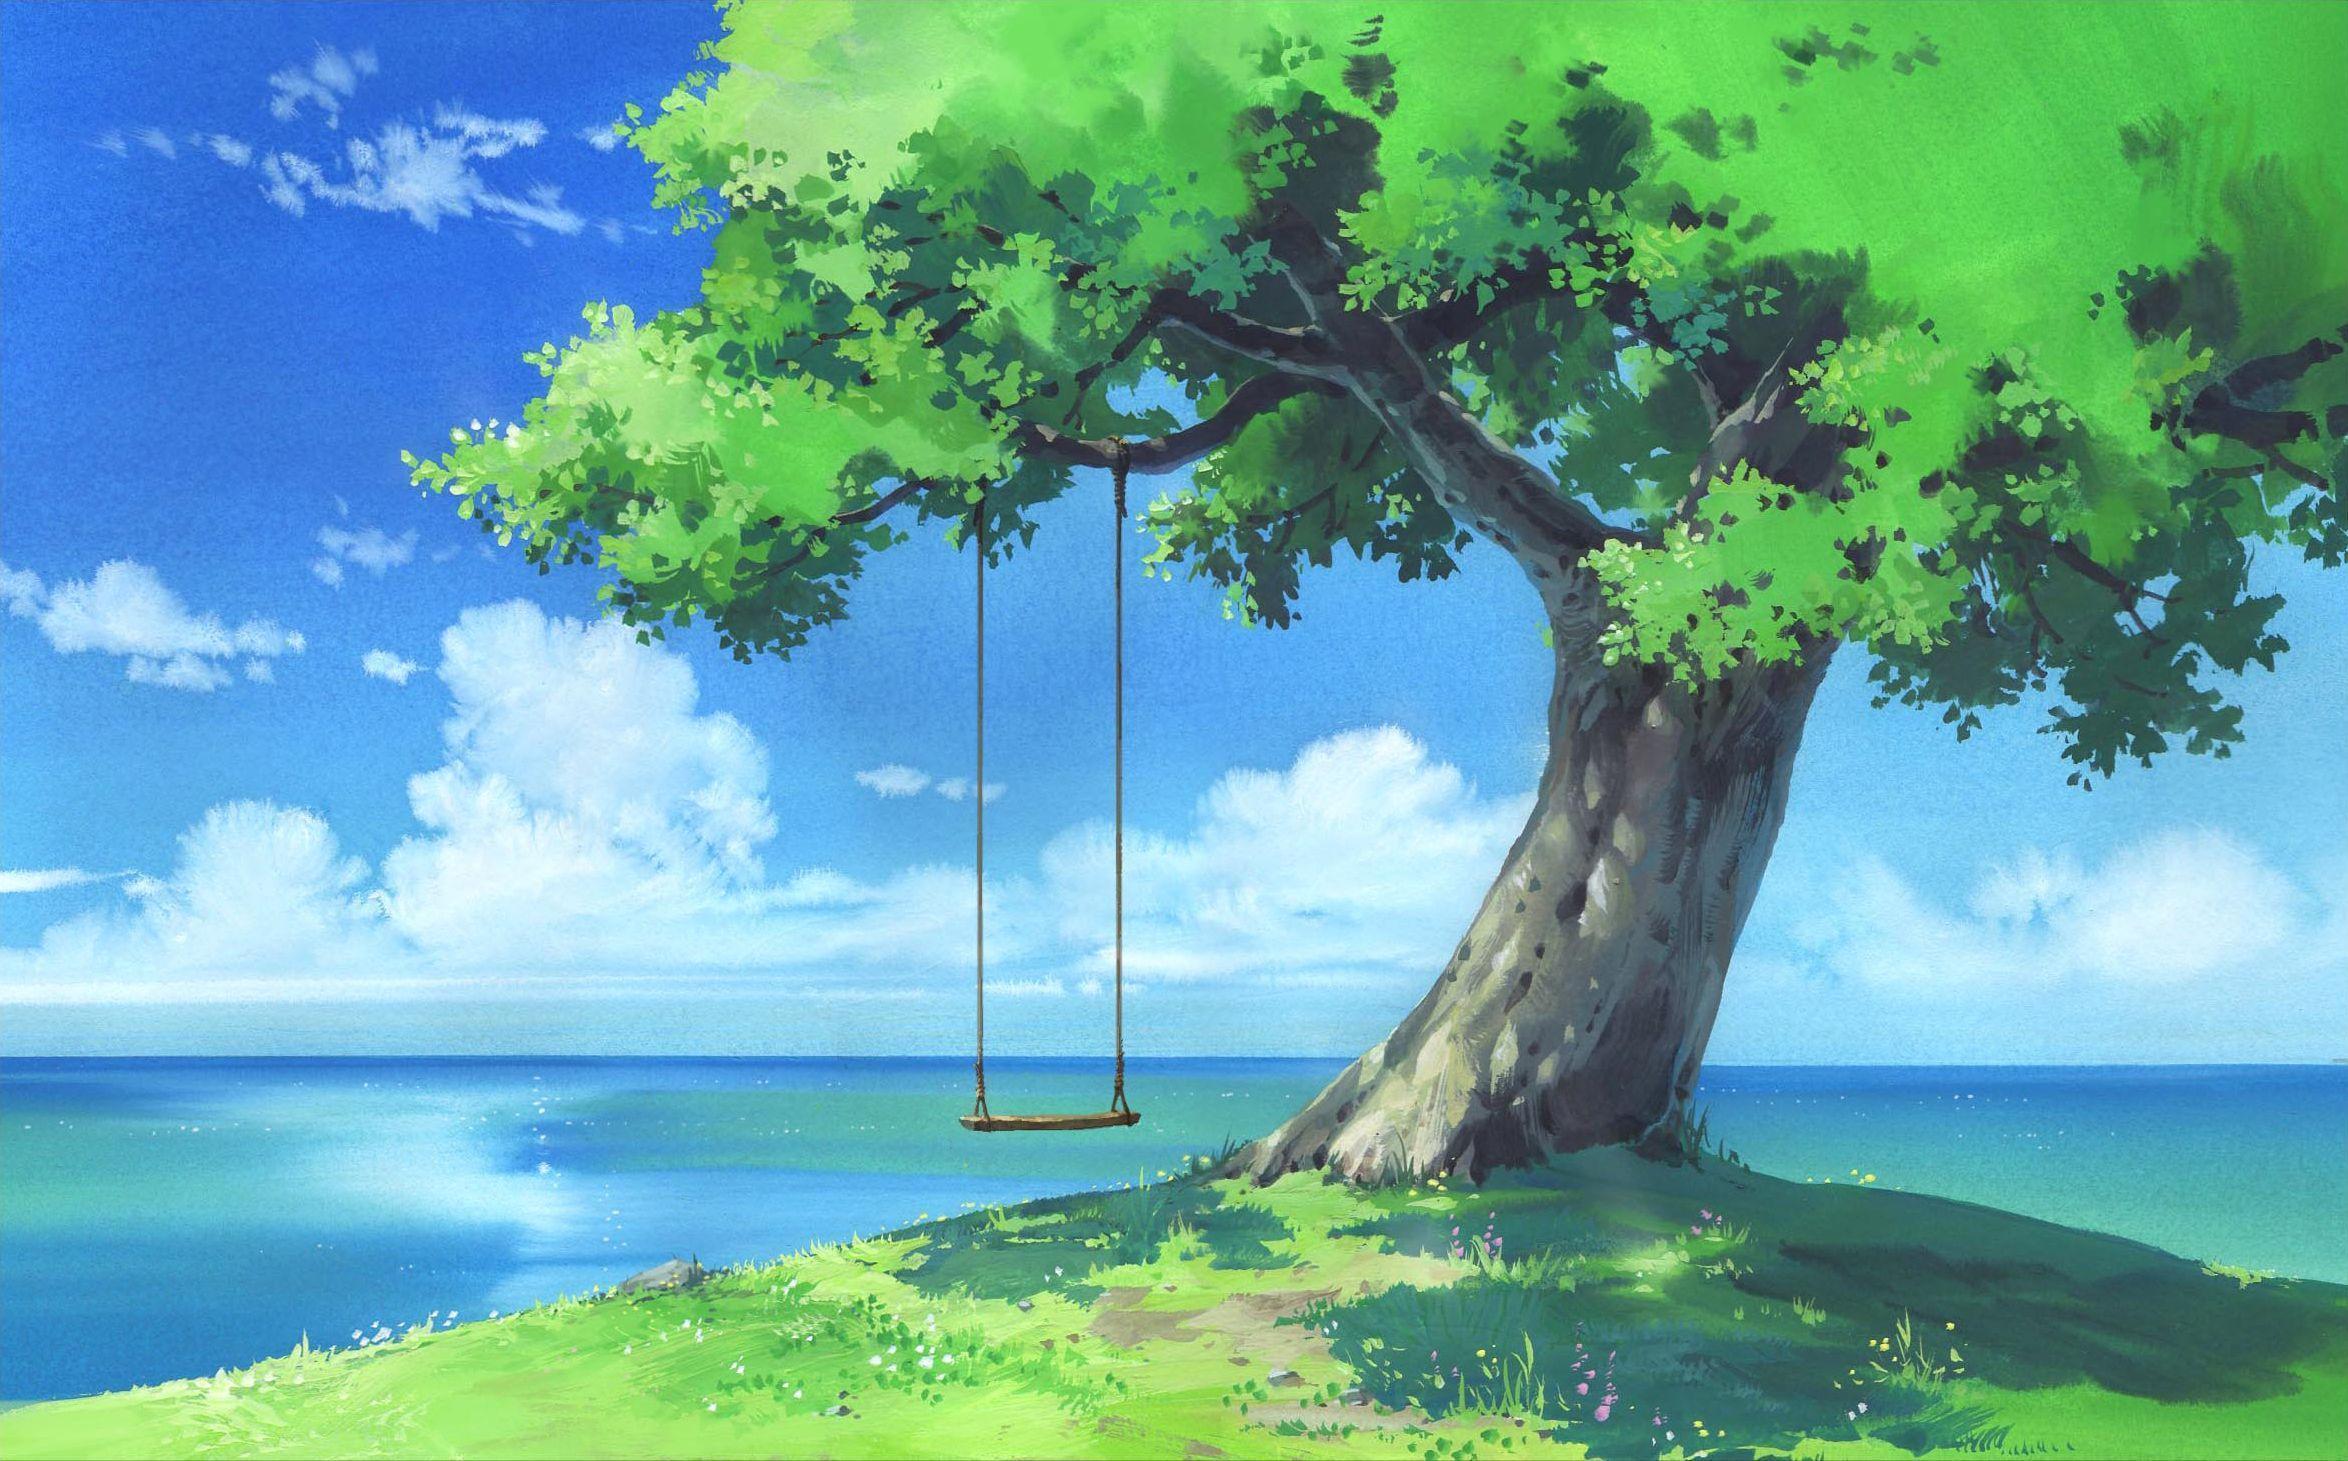  You can also upload and share your favorite anime iphone wallpapers 19+  Scenery Iphone